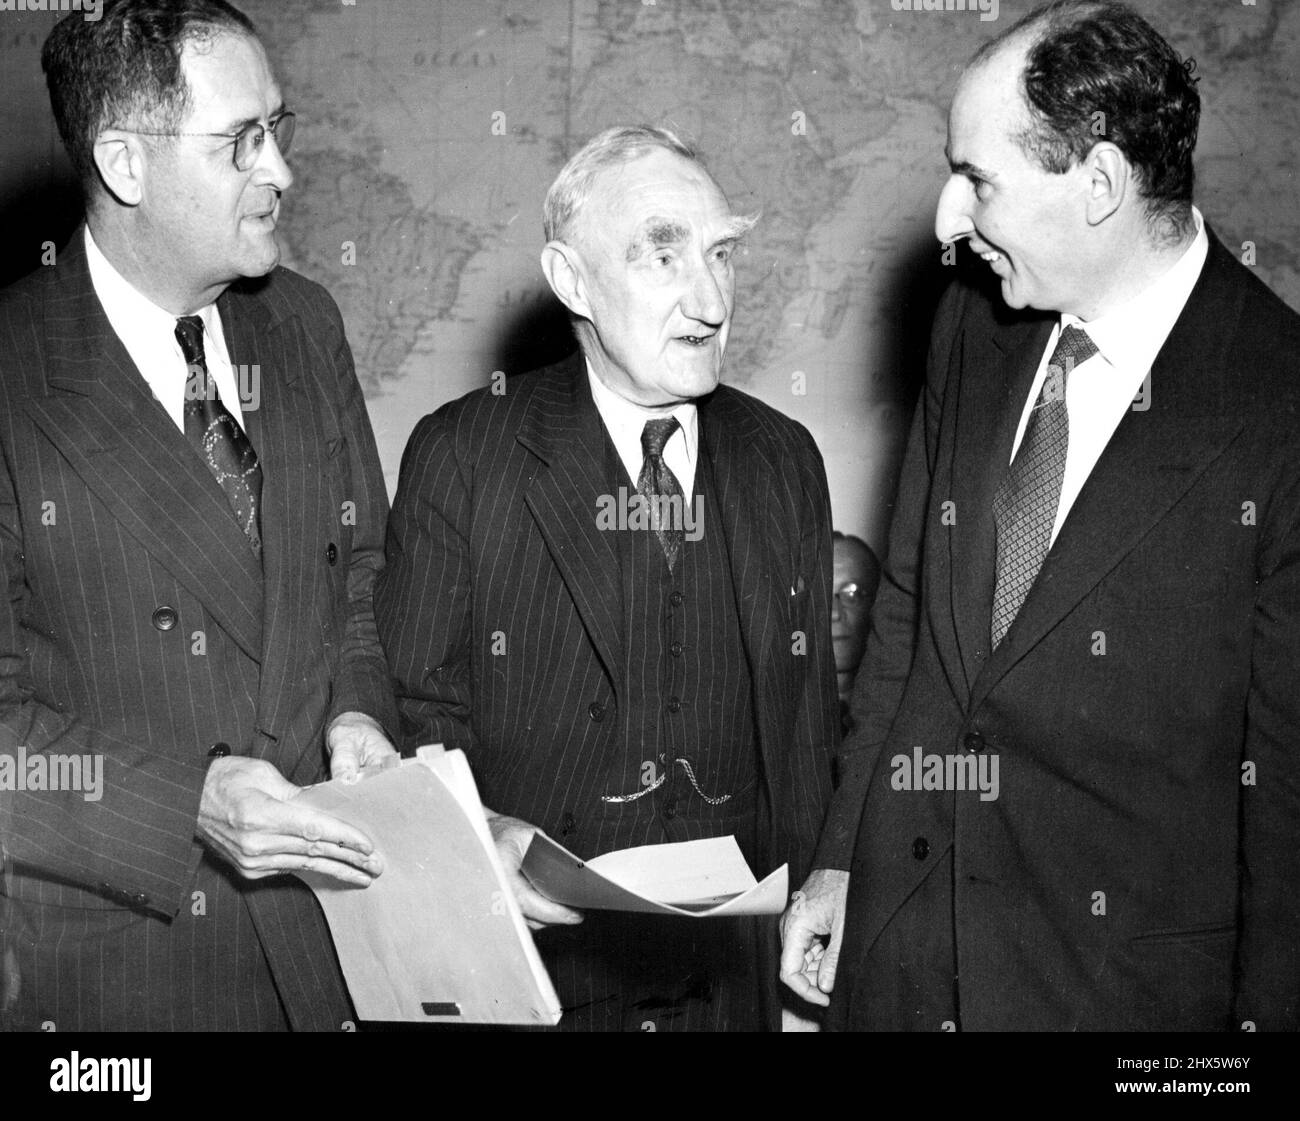 At Food Council Meeting - Left to right: Clinton P. Anderson, U.S.; Sir John Boyd Orr, representing the food and agriculture organization of the U.N.; and Sir John Strachey, British food minister, attend the opening meeting of the International emergency food council in Washington, D.C., June 20. June 21, 1946. (Photo by Associated Press Photo). Stock Photo